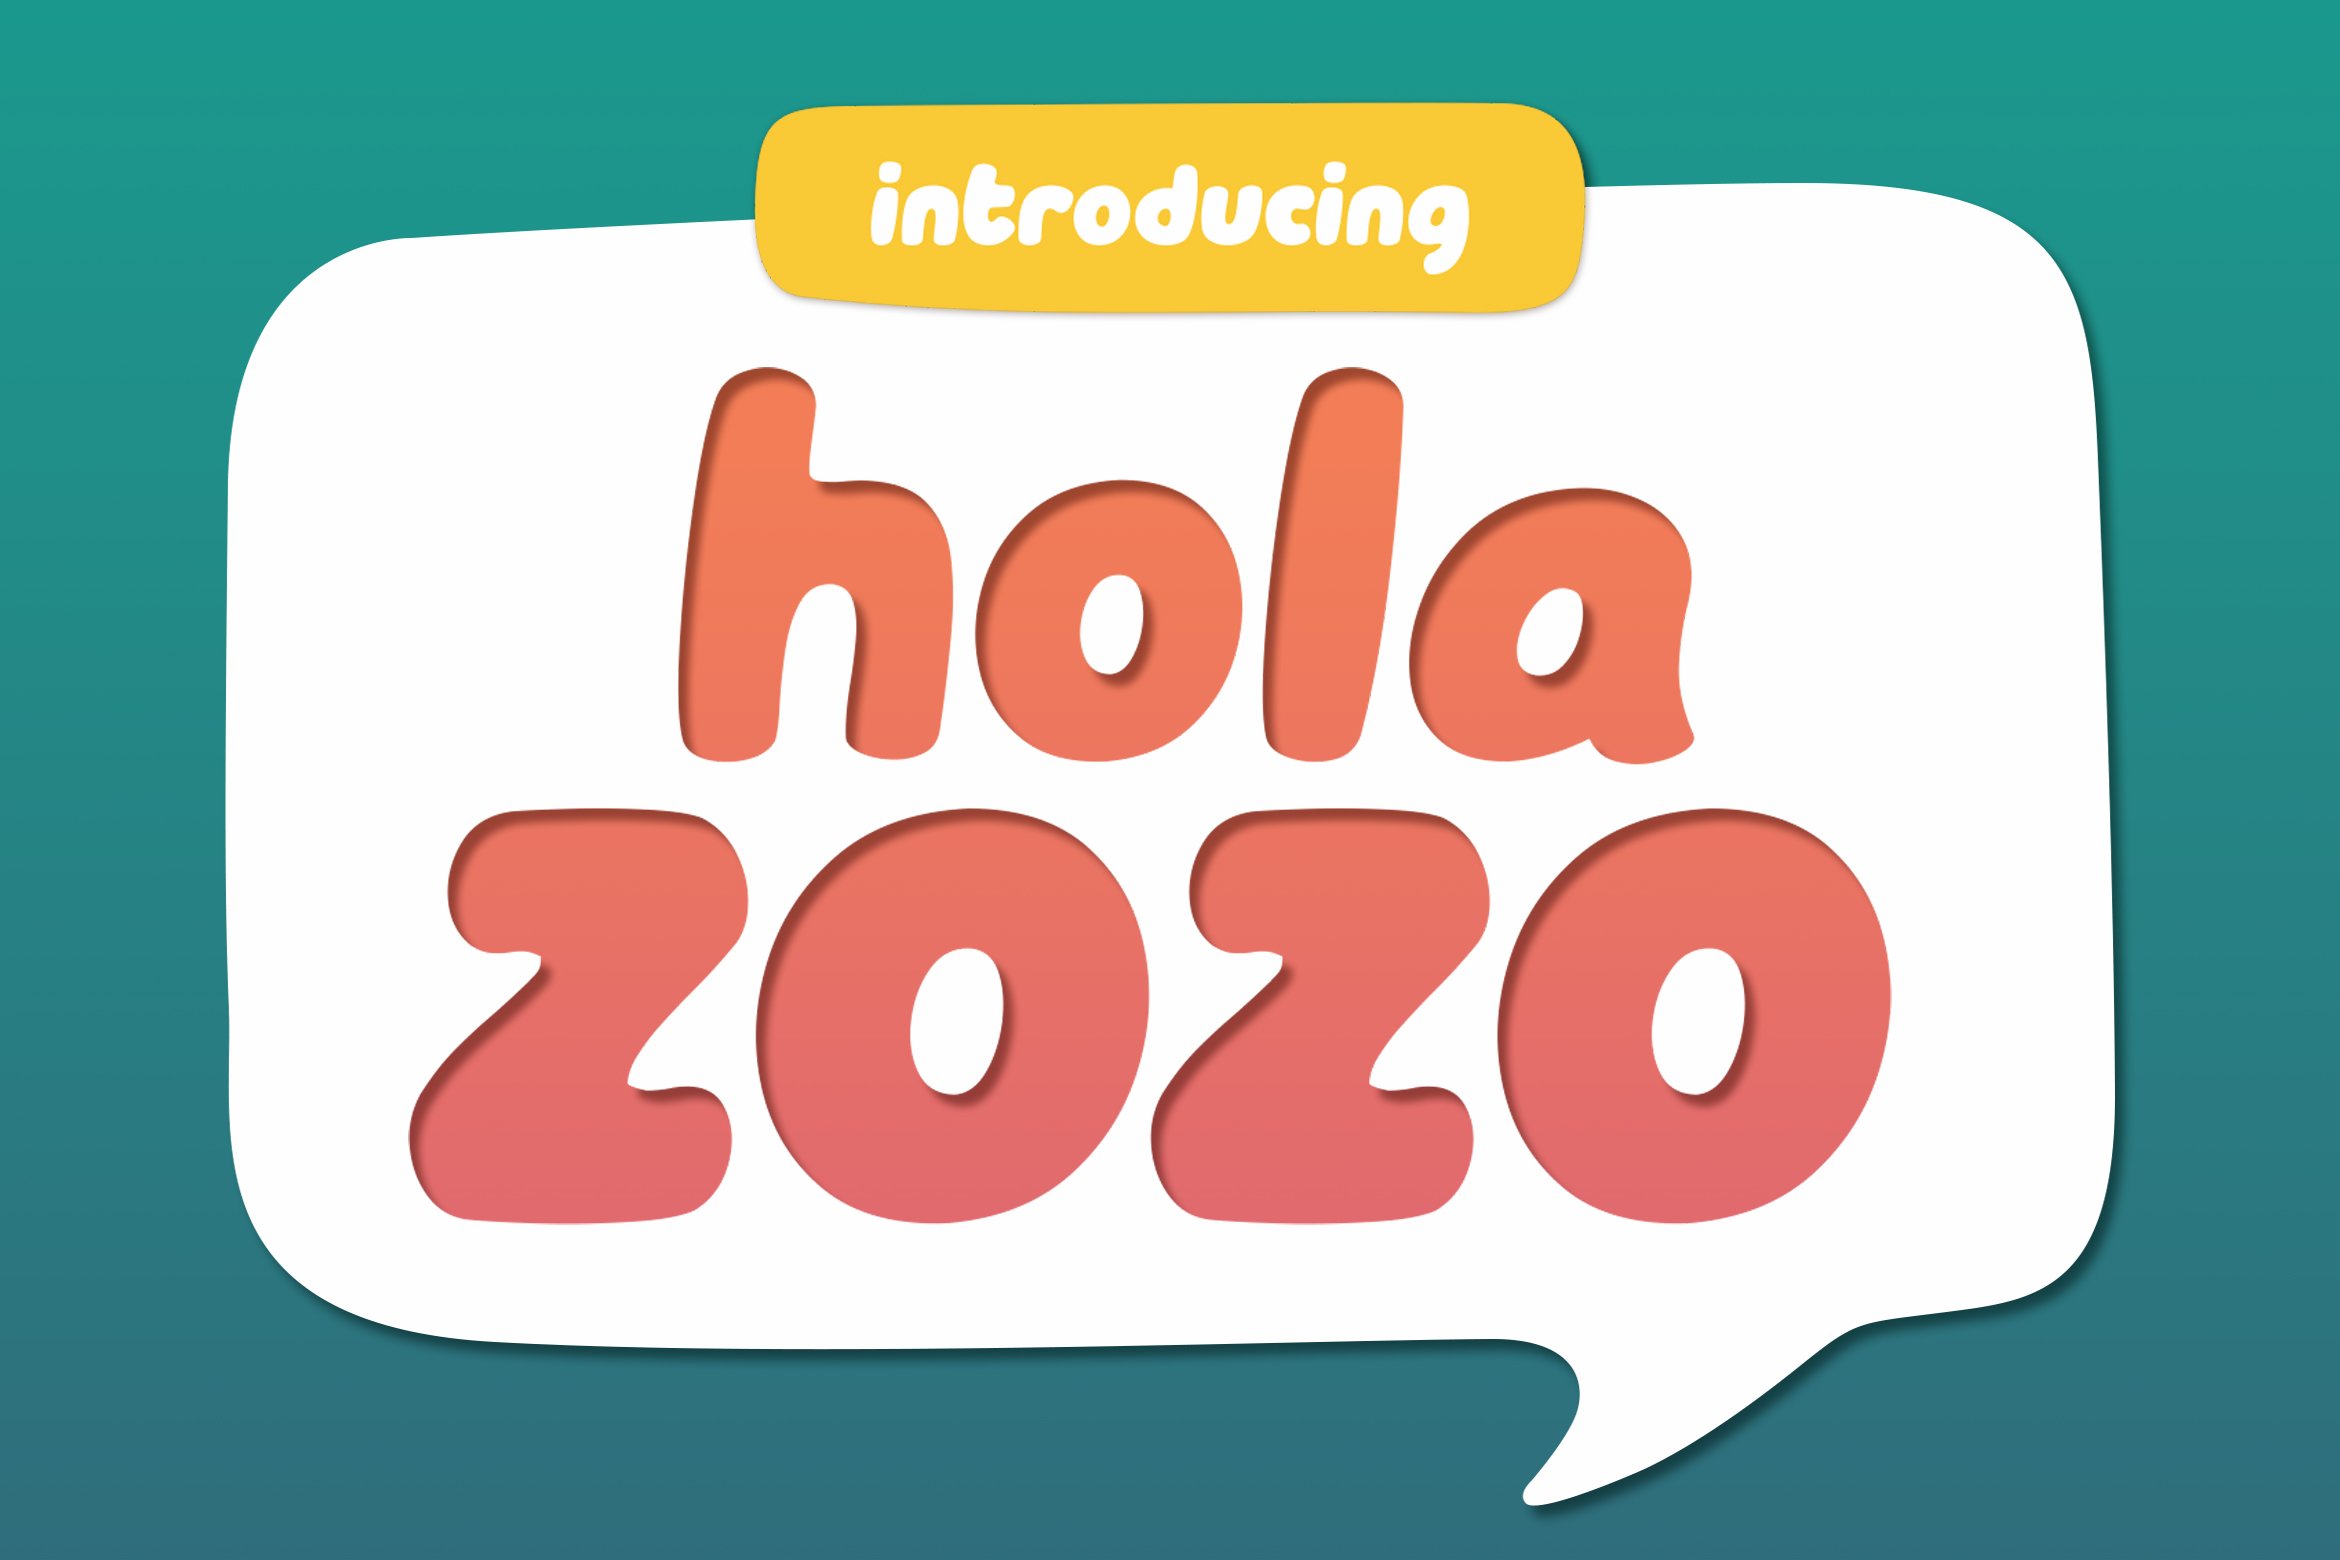 Hola Zozo ~ A Chubby Font cover image.